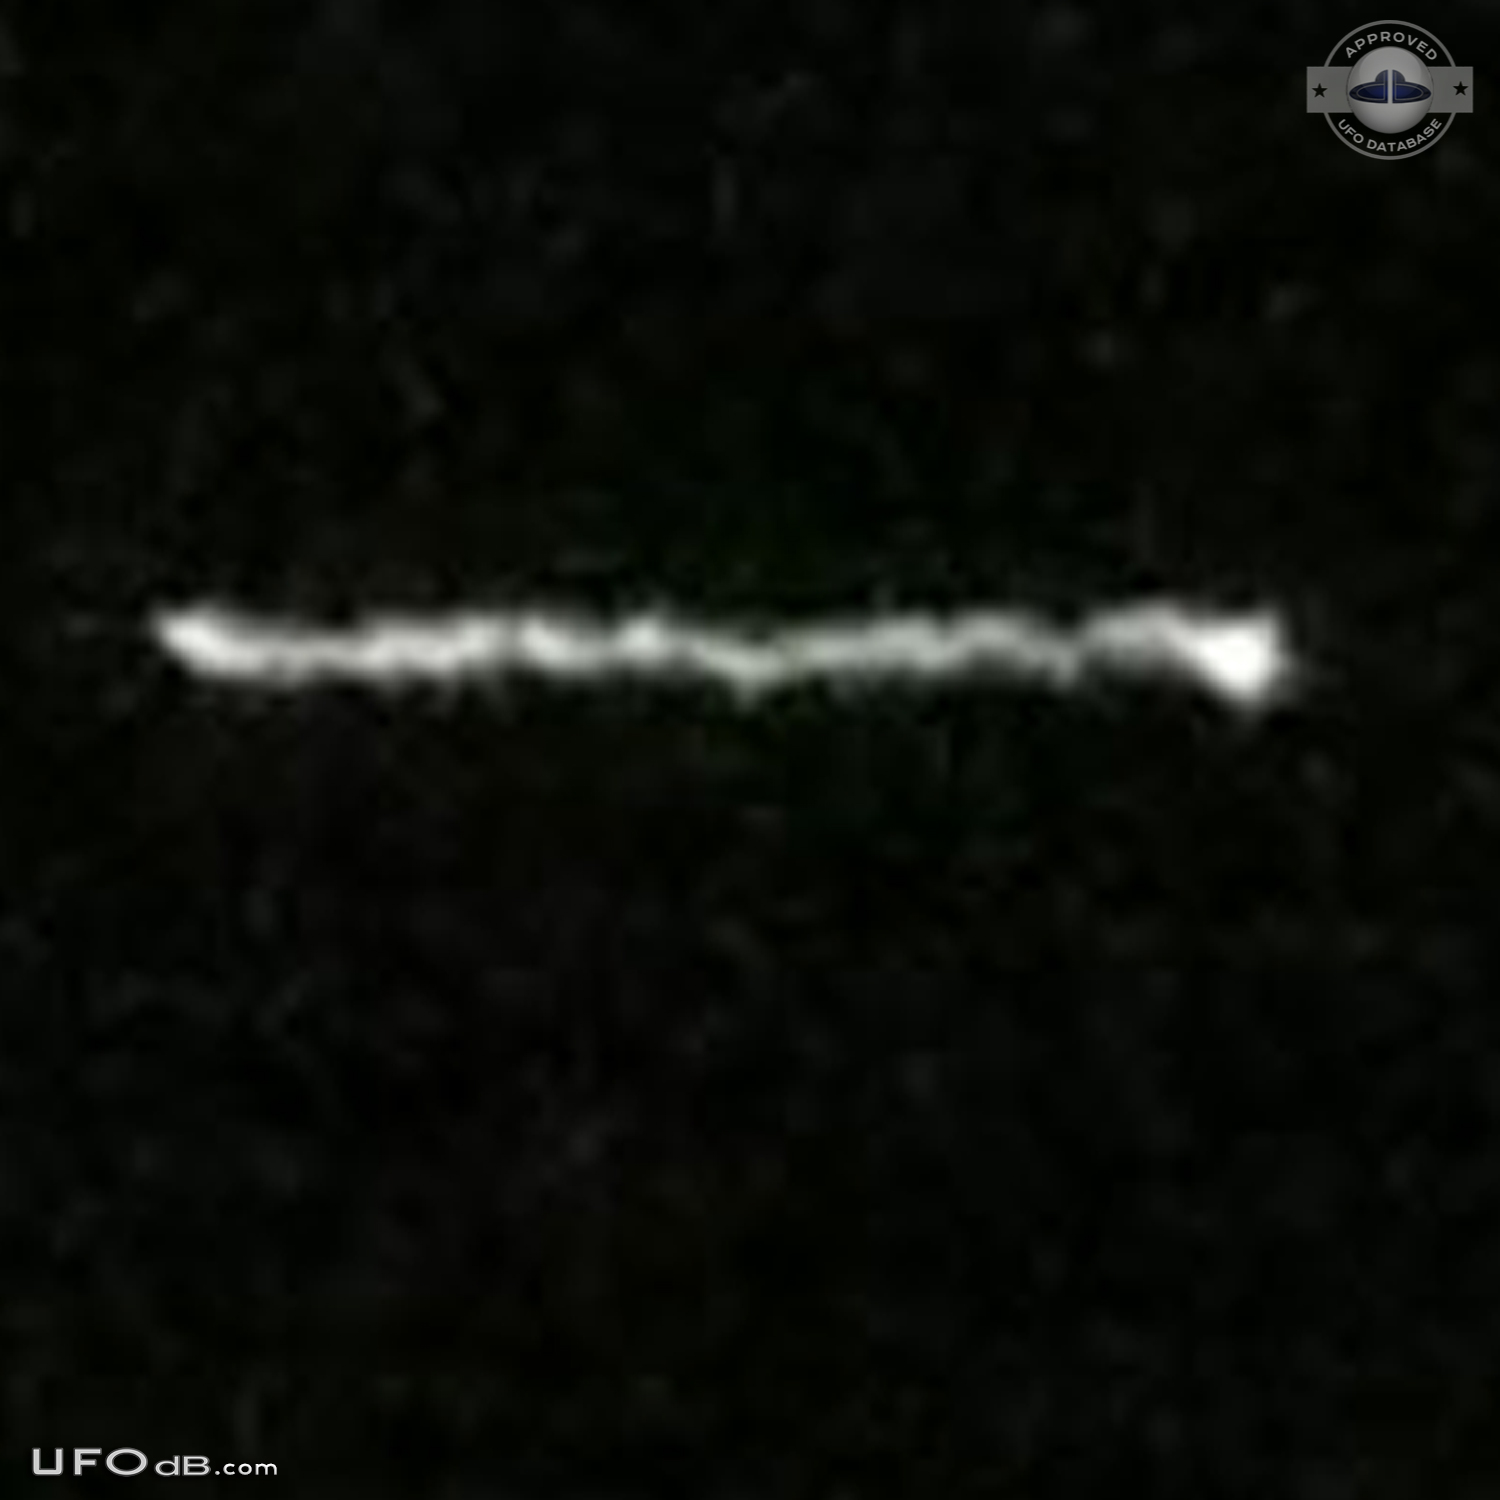 Straight line of white light UFO changing direction over Chichen Itza UFO Picture #635-6